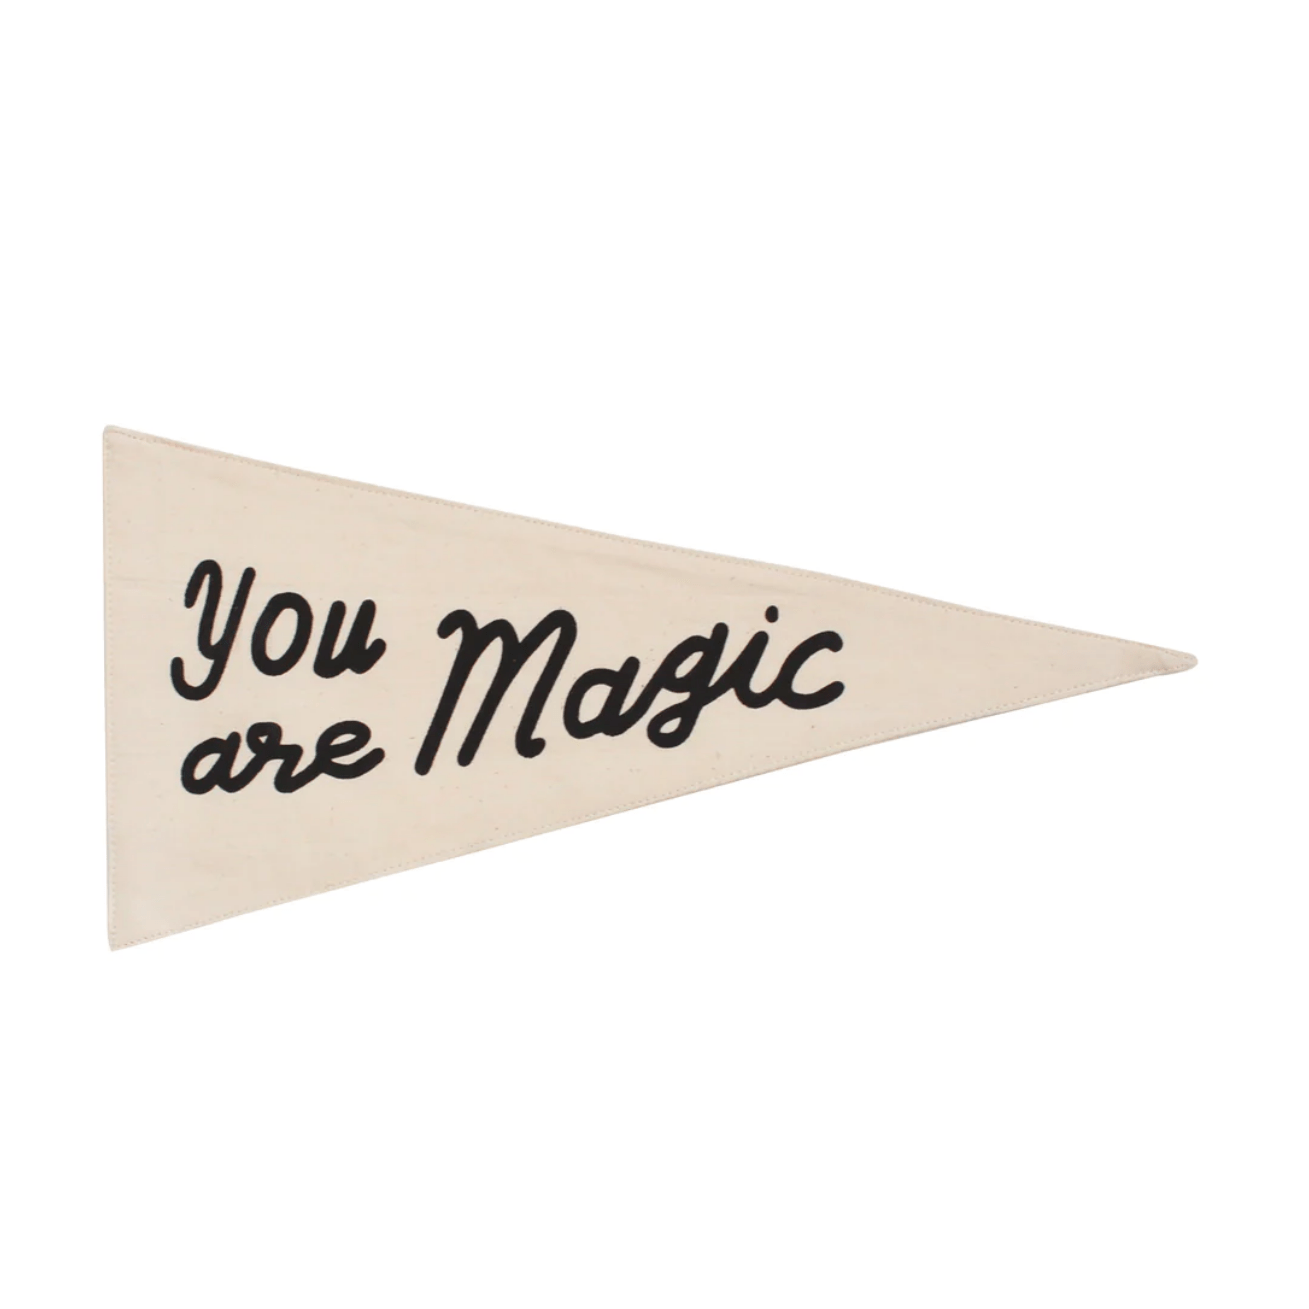 Imani Collective Décor "You Are Magic" Pennant